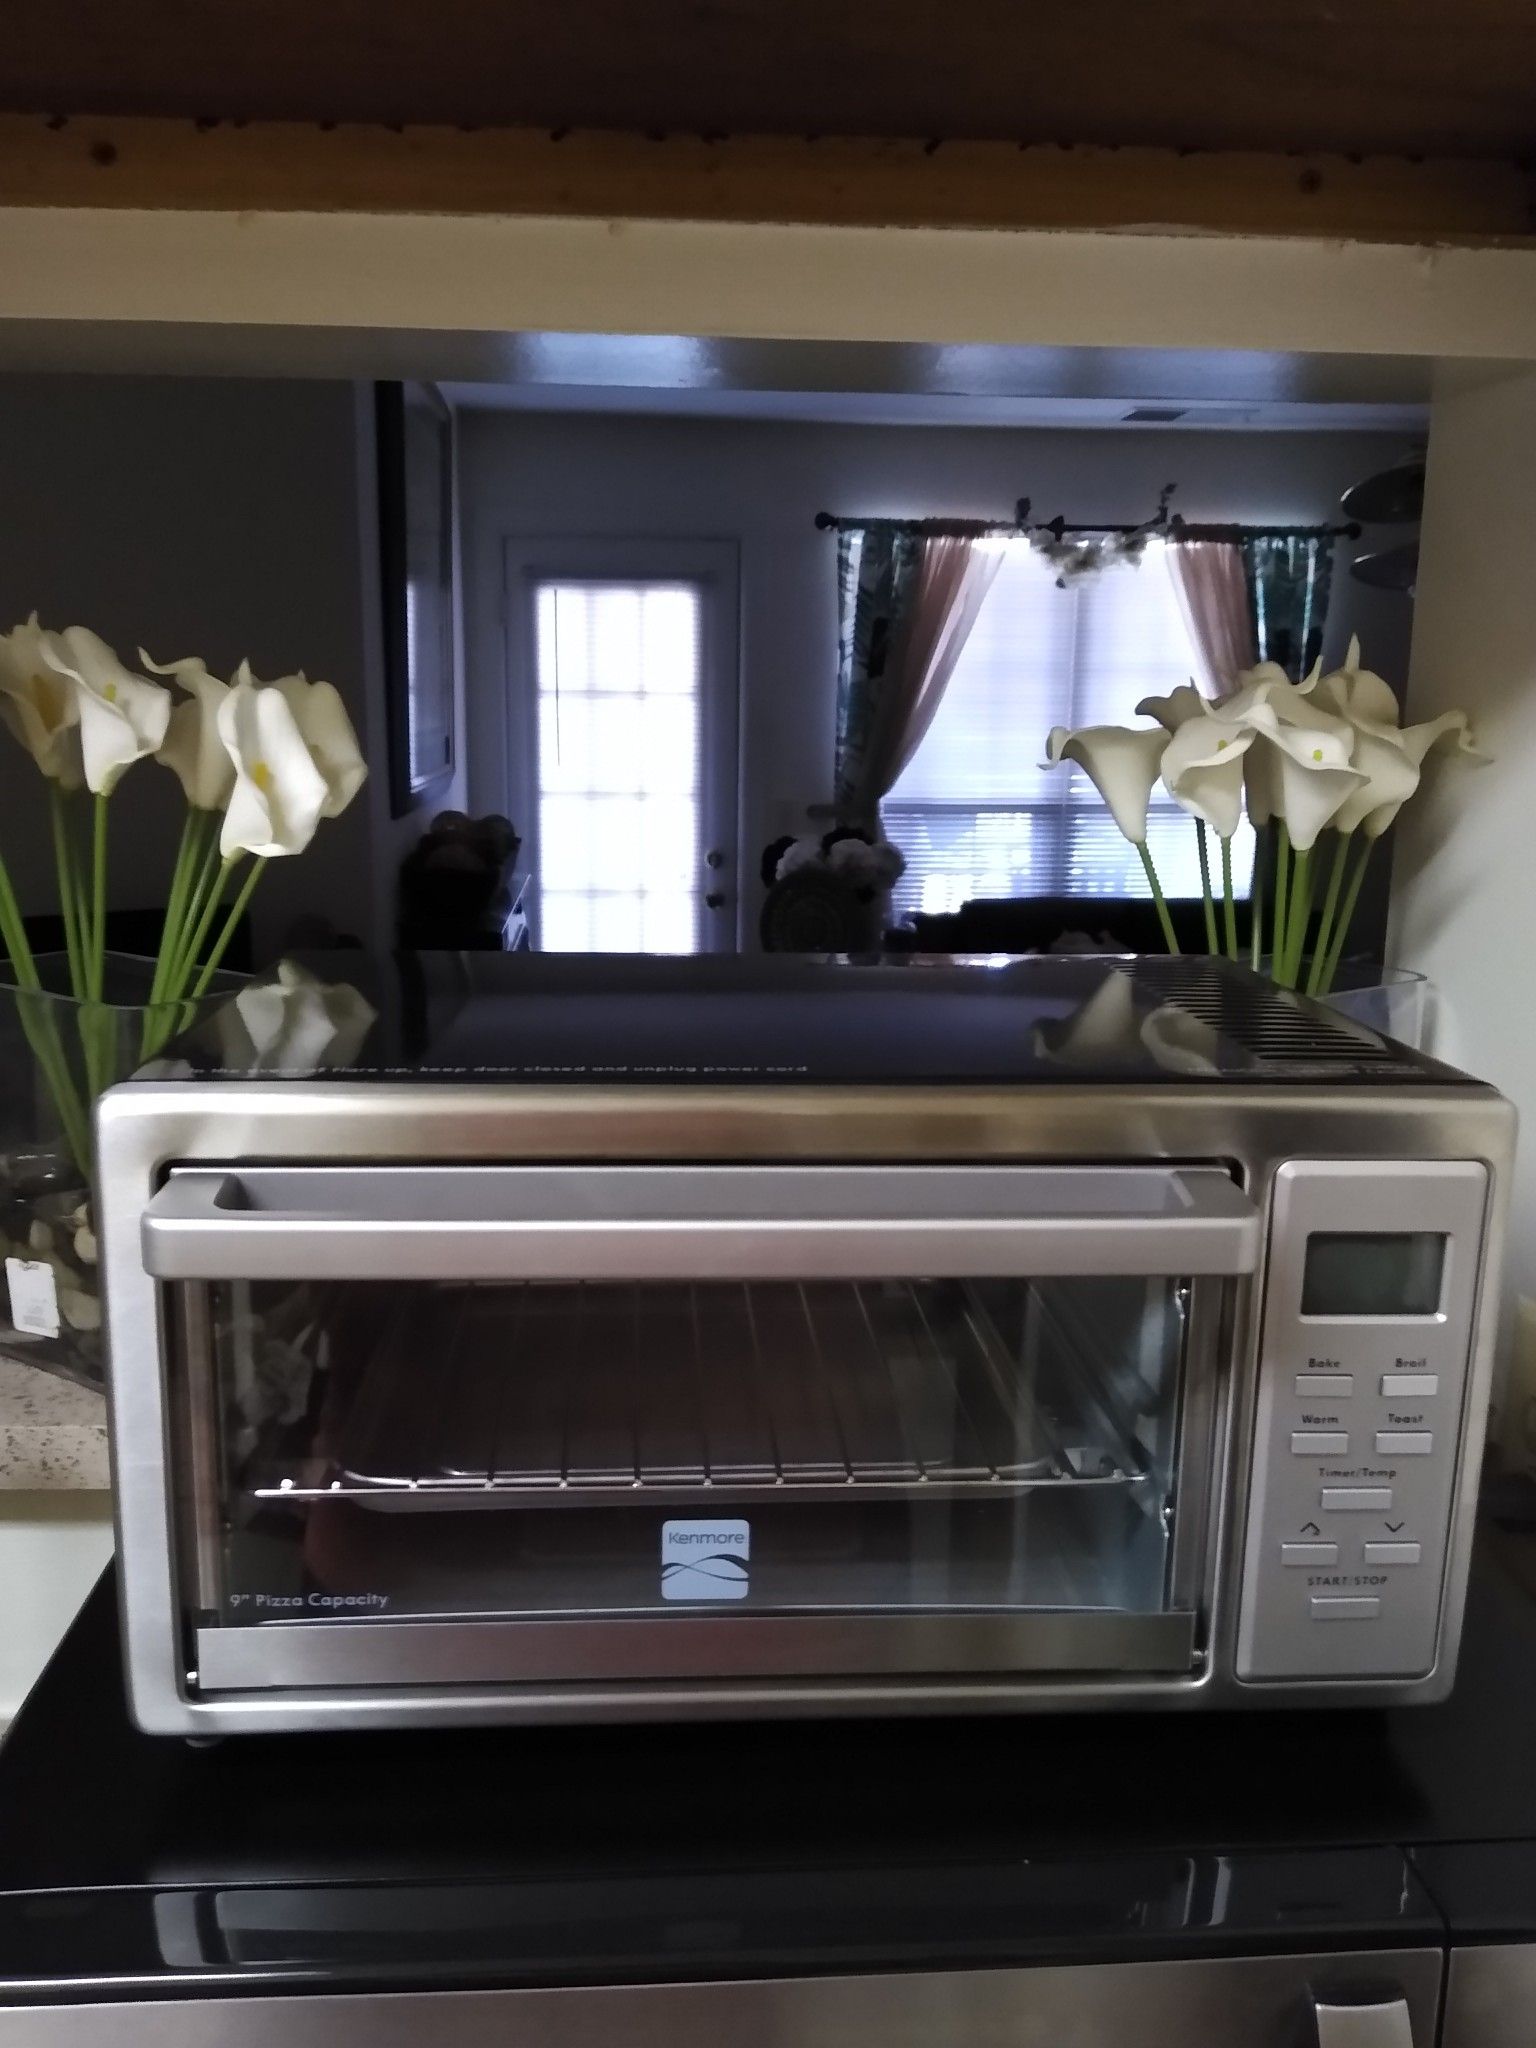 Use digital toaster oven like new $25 Kenmore